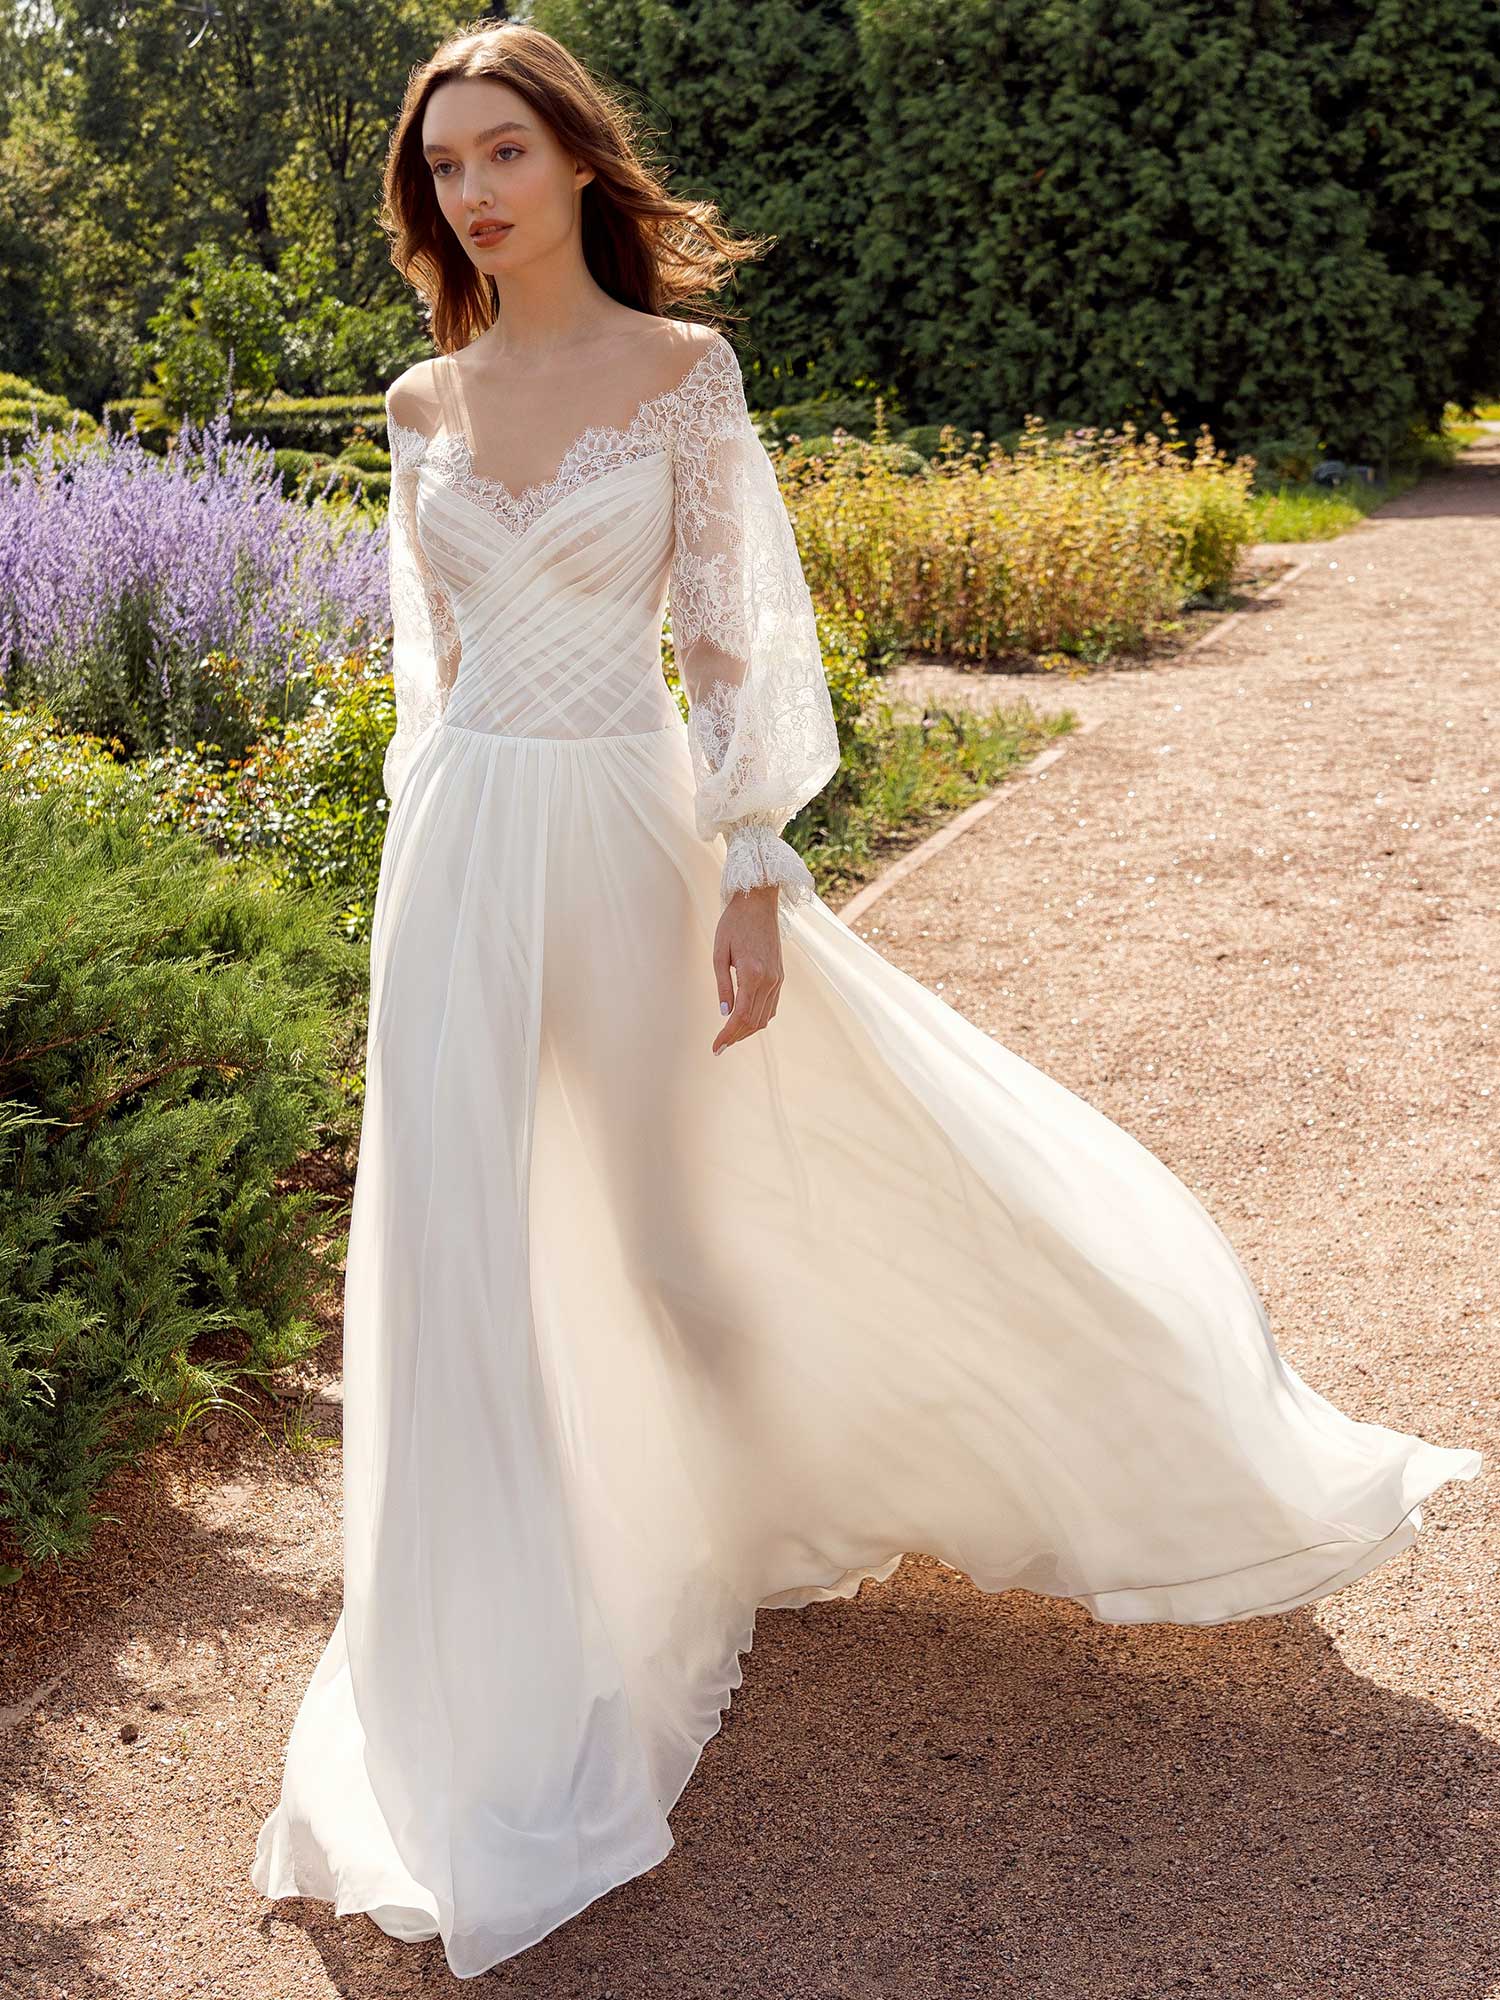 Off the shoulder sheath wedding dress with lace bishop style sleeves